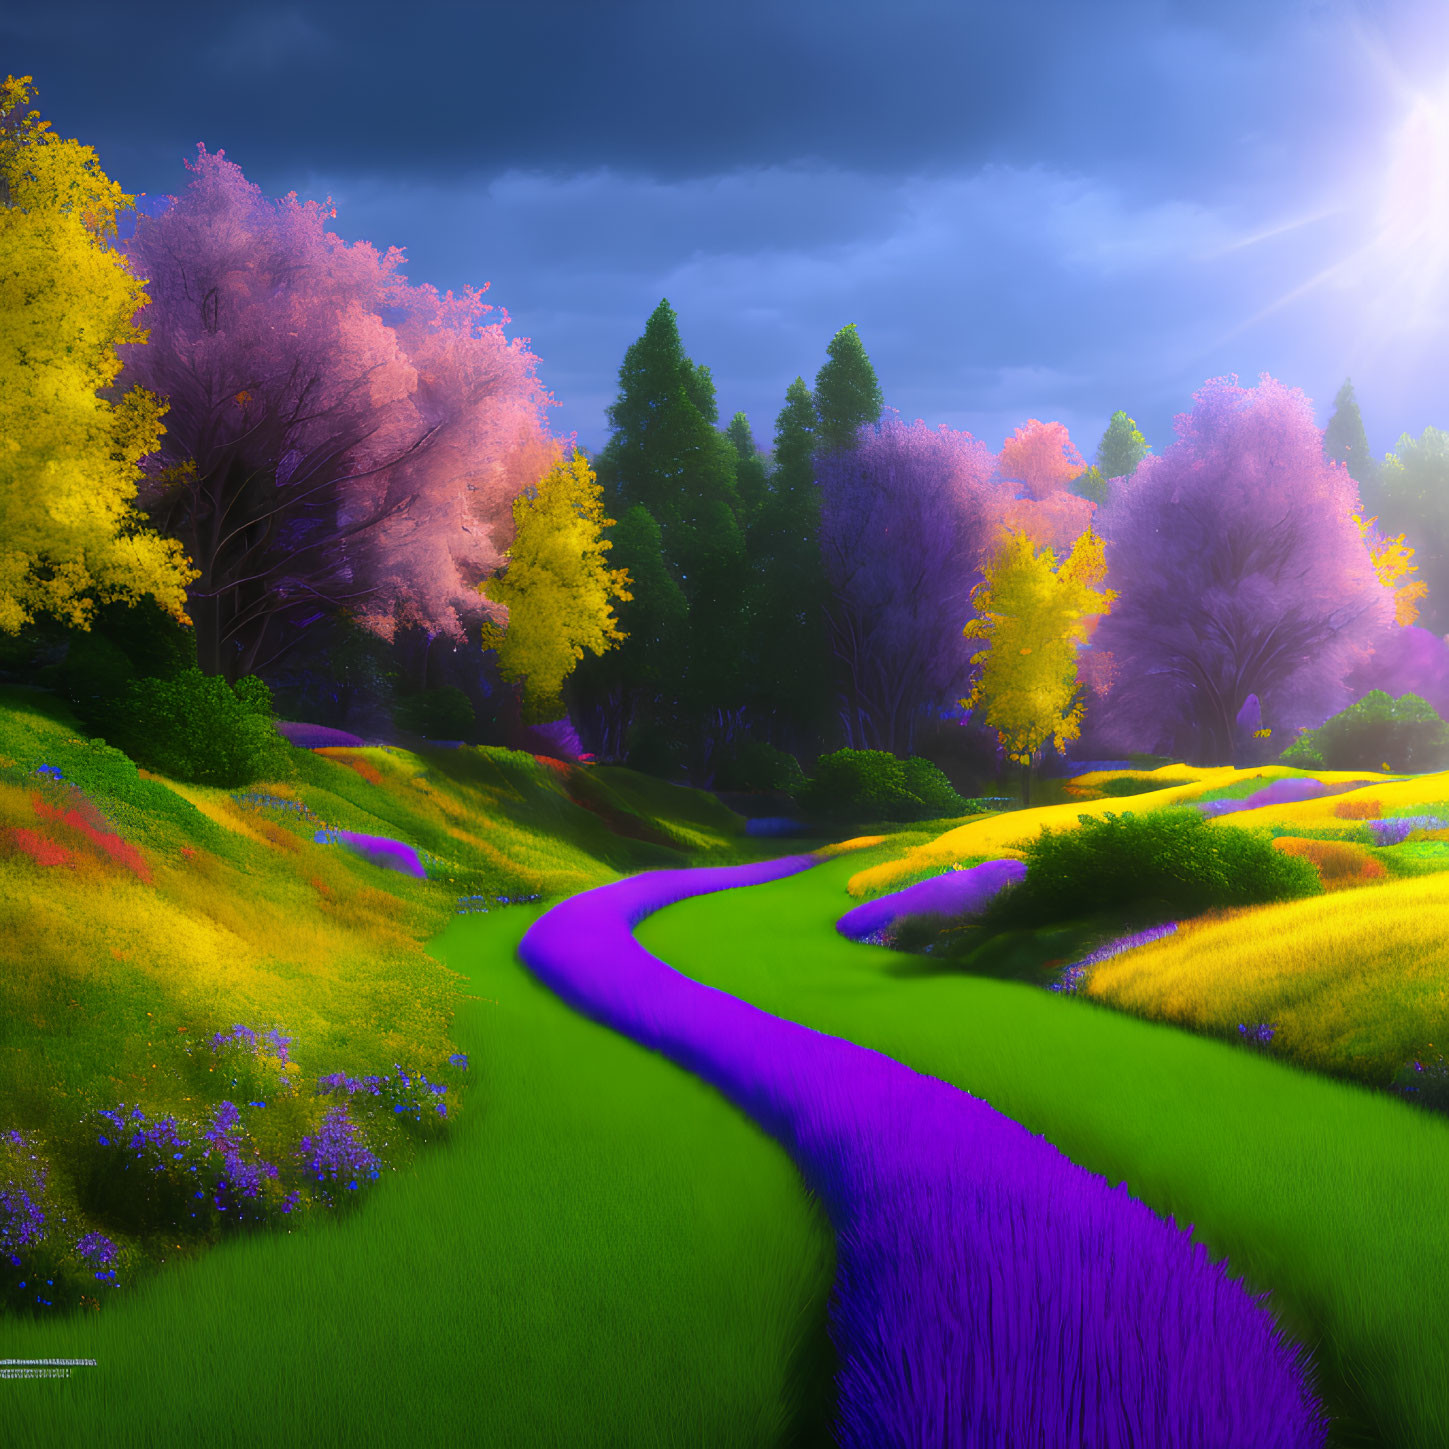 Colorful landscape with winding path, pink trees, and vibrant flowers under a bright sun and dramatic sky